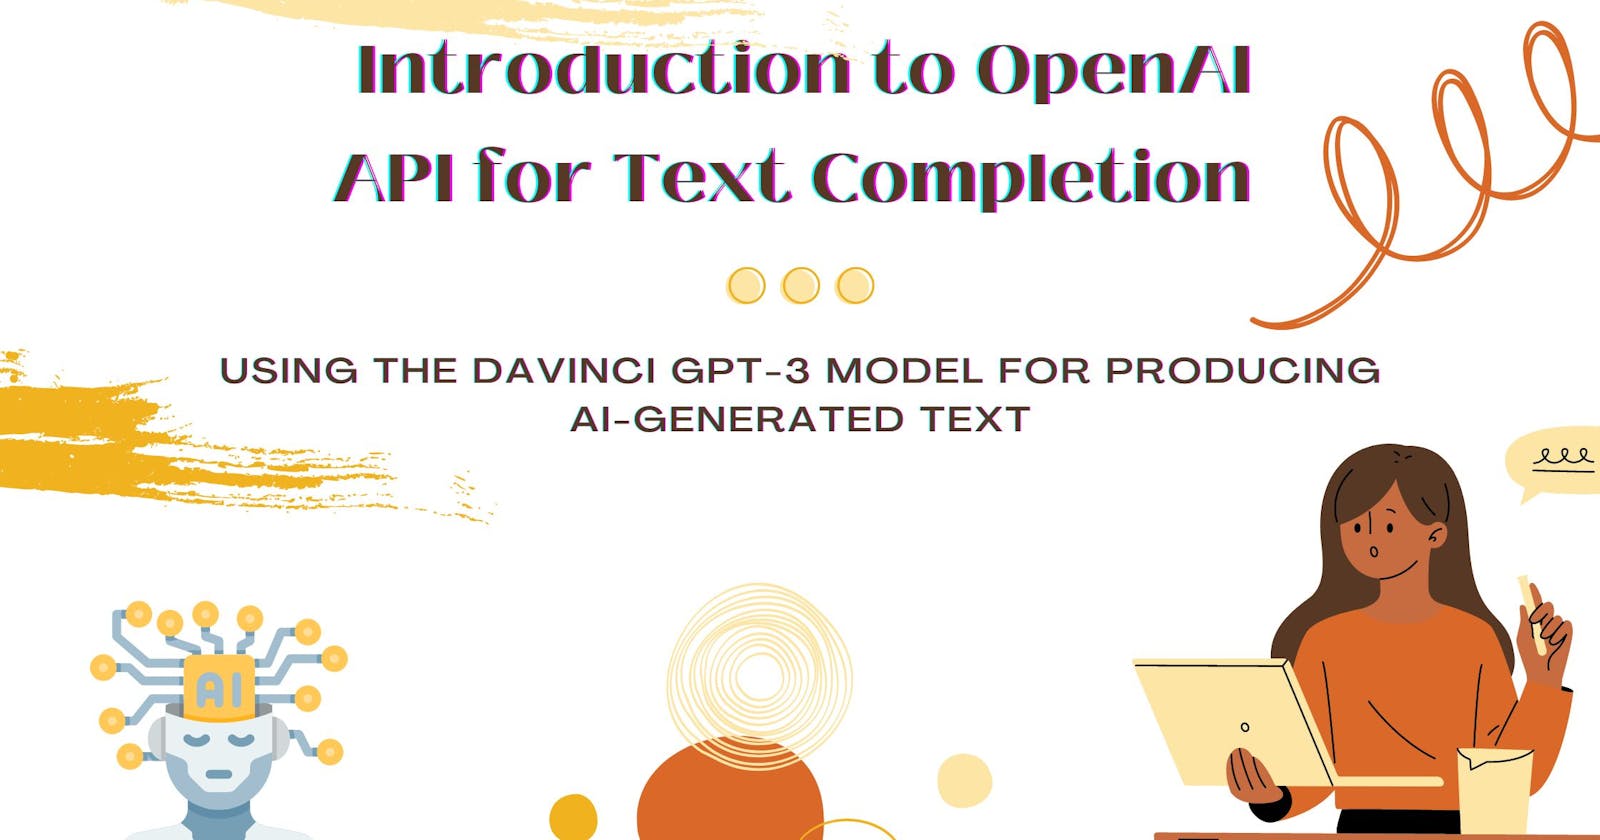 Introduction to OpenAI API for Text Completion